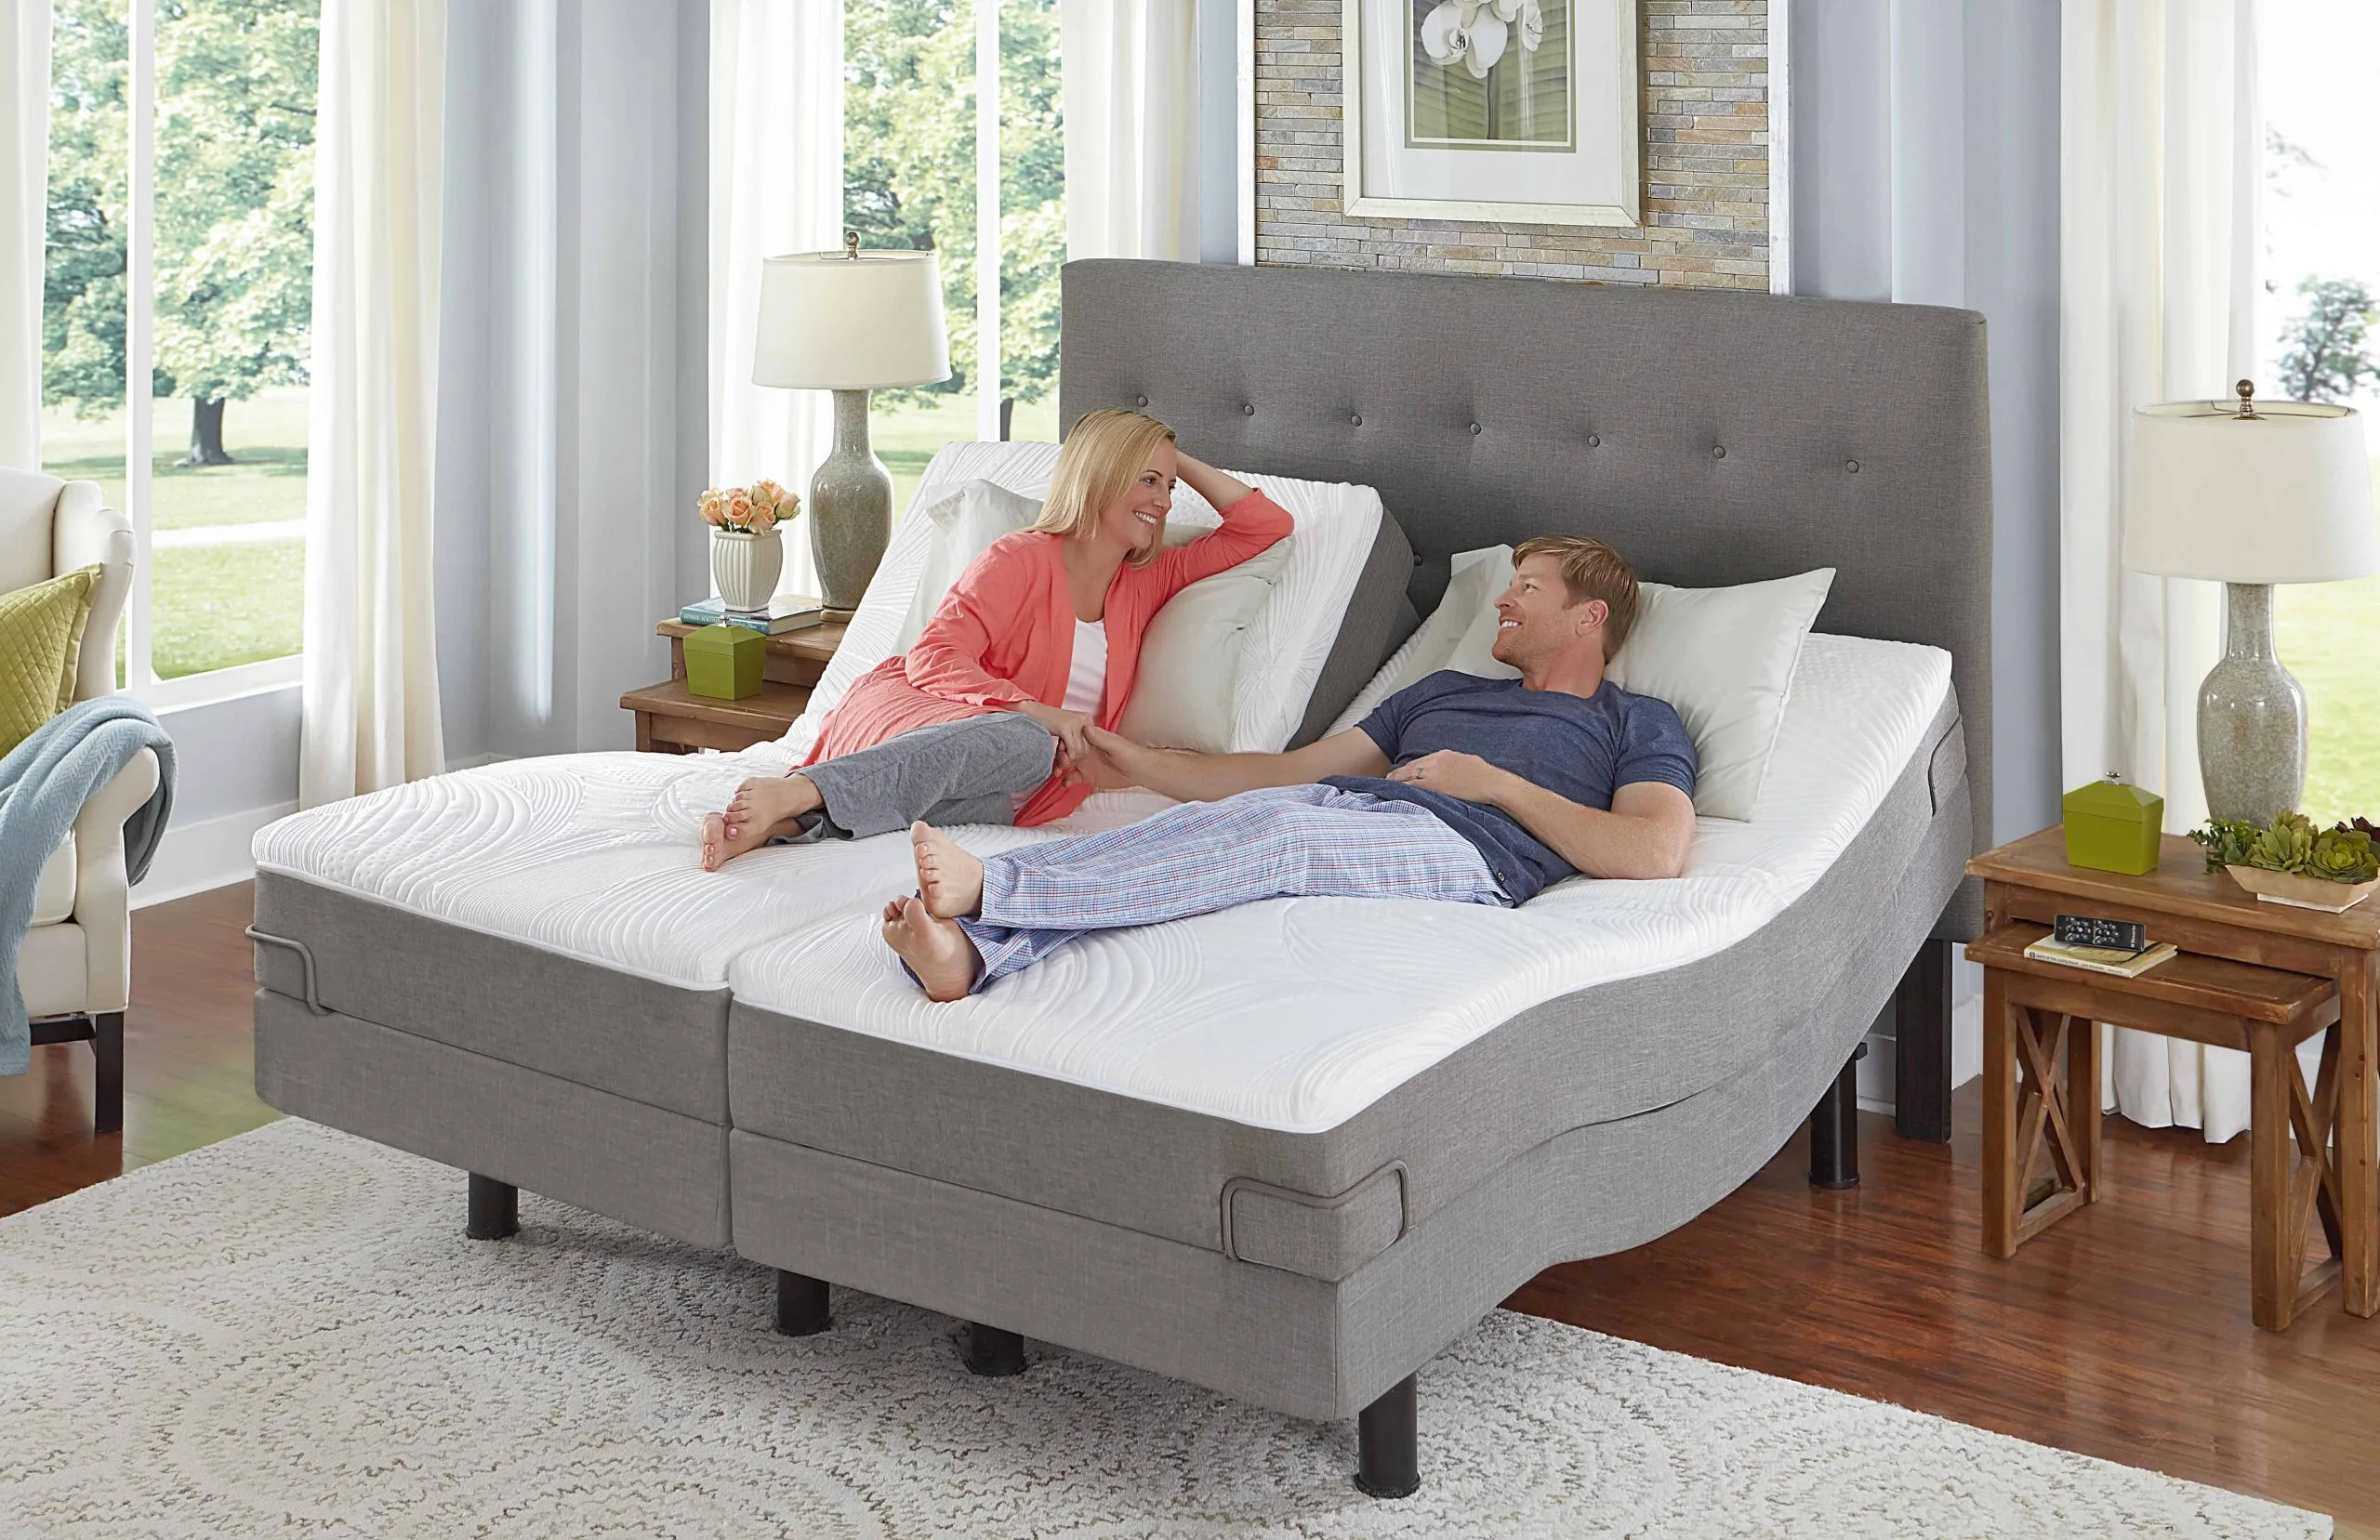 The DOs and DON'Ts of Buying an Adjustable Bed